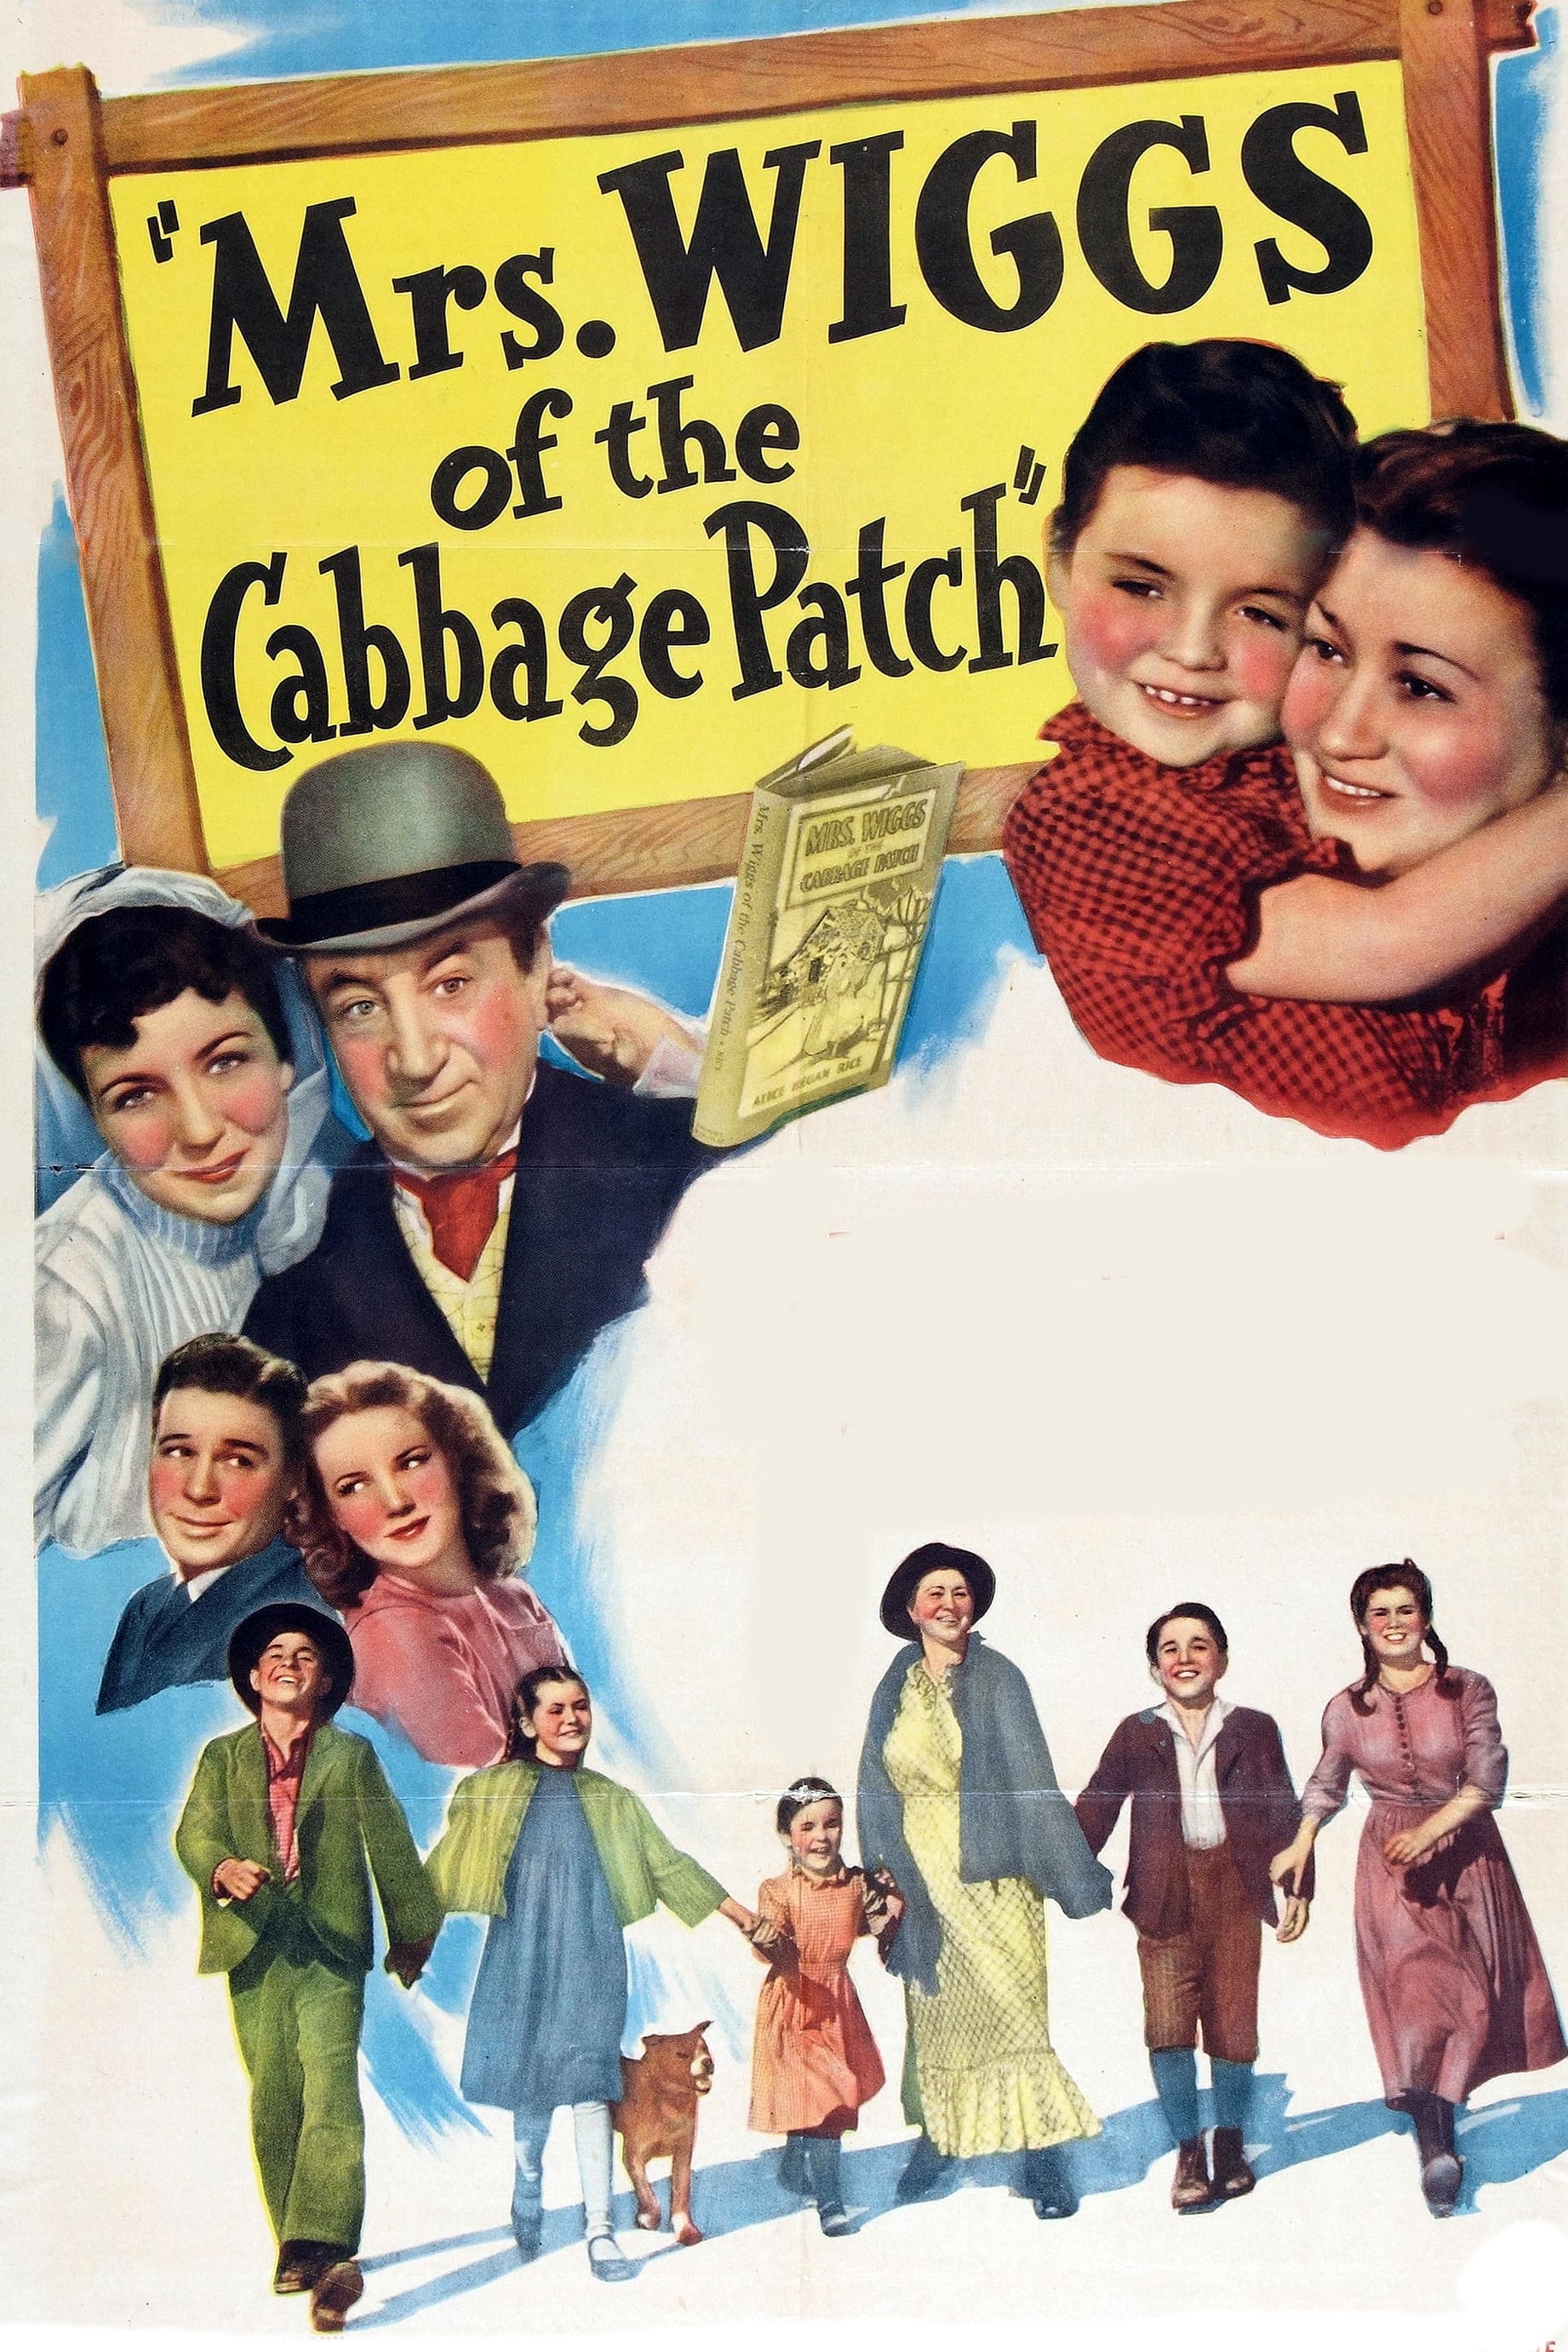 Mrs. Wiggs of the Cabbage Patch (1942)